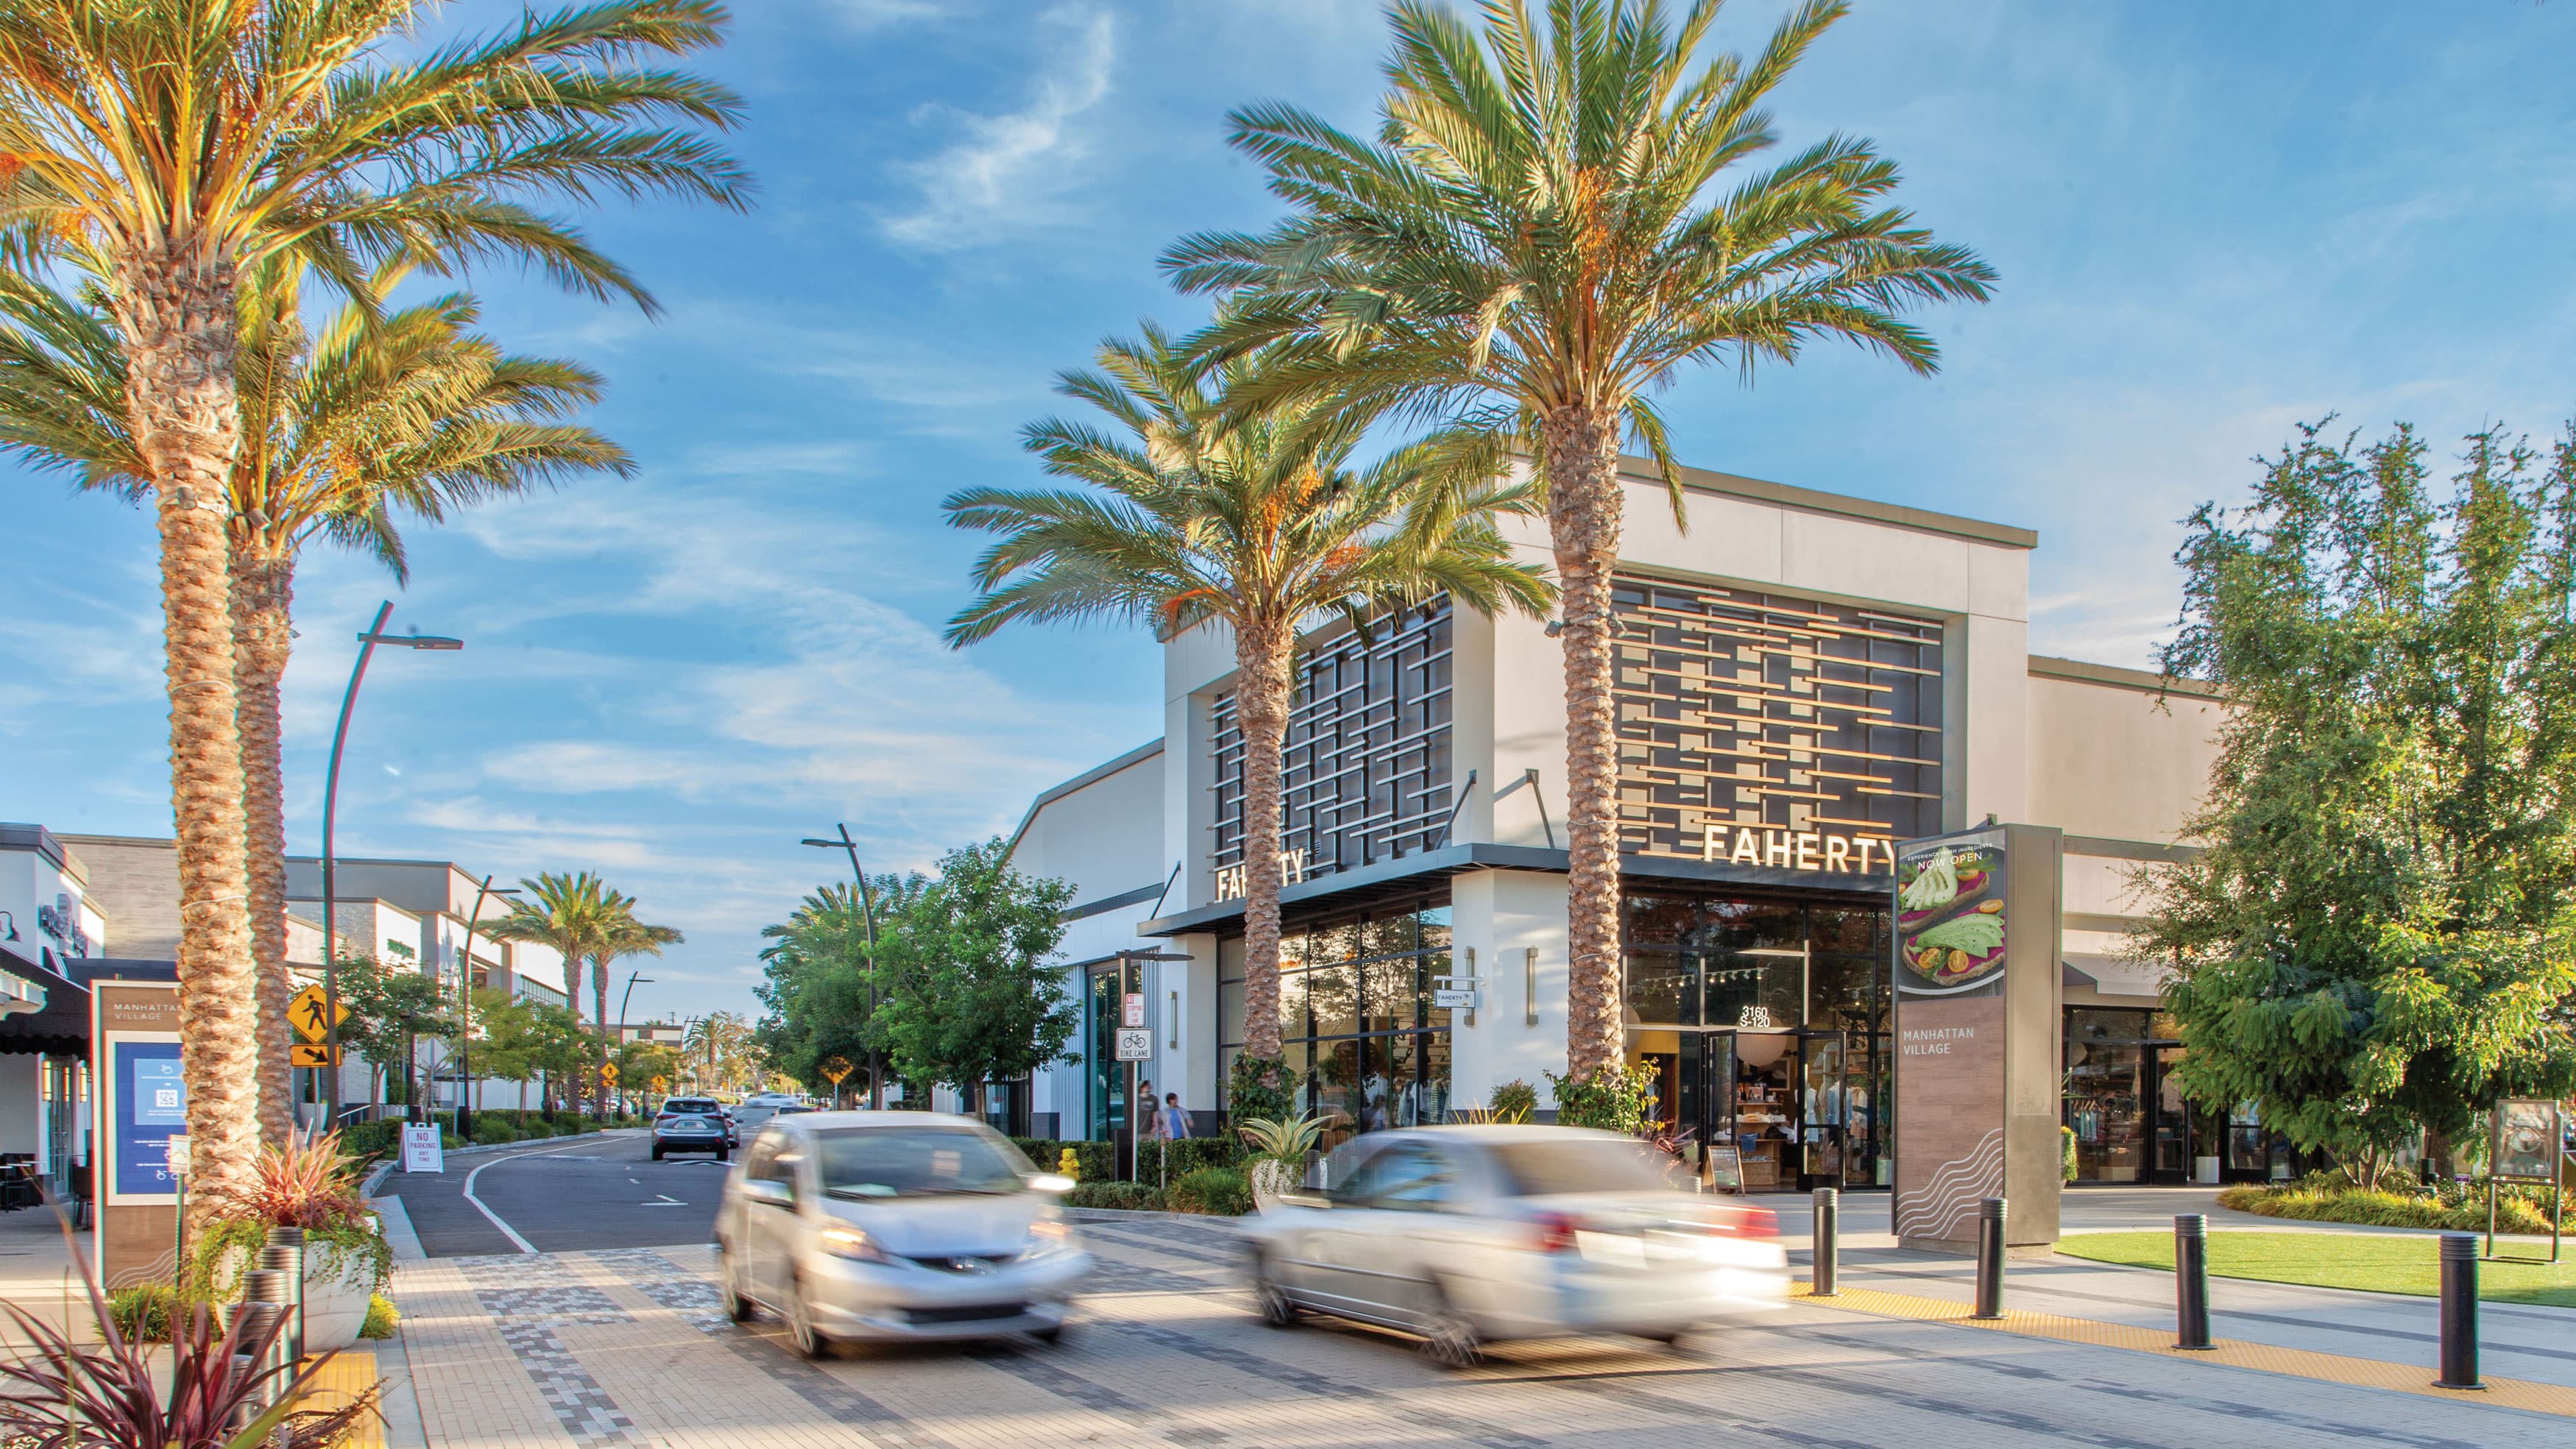 A view of the retail center entry at Manhattan Village with palm trees and cars in the background.